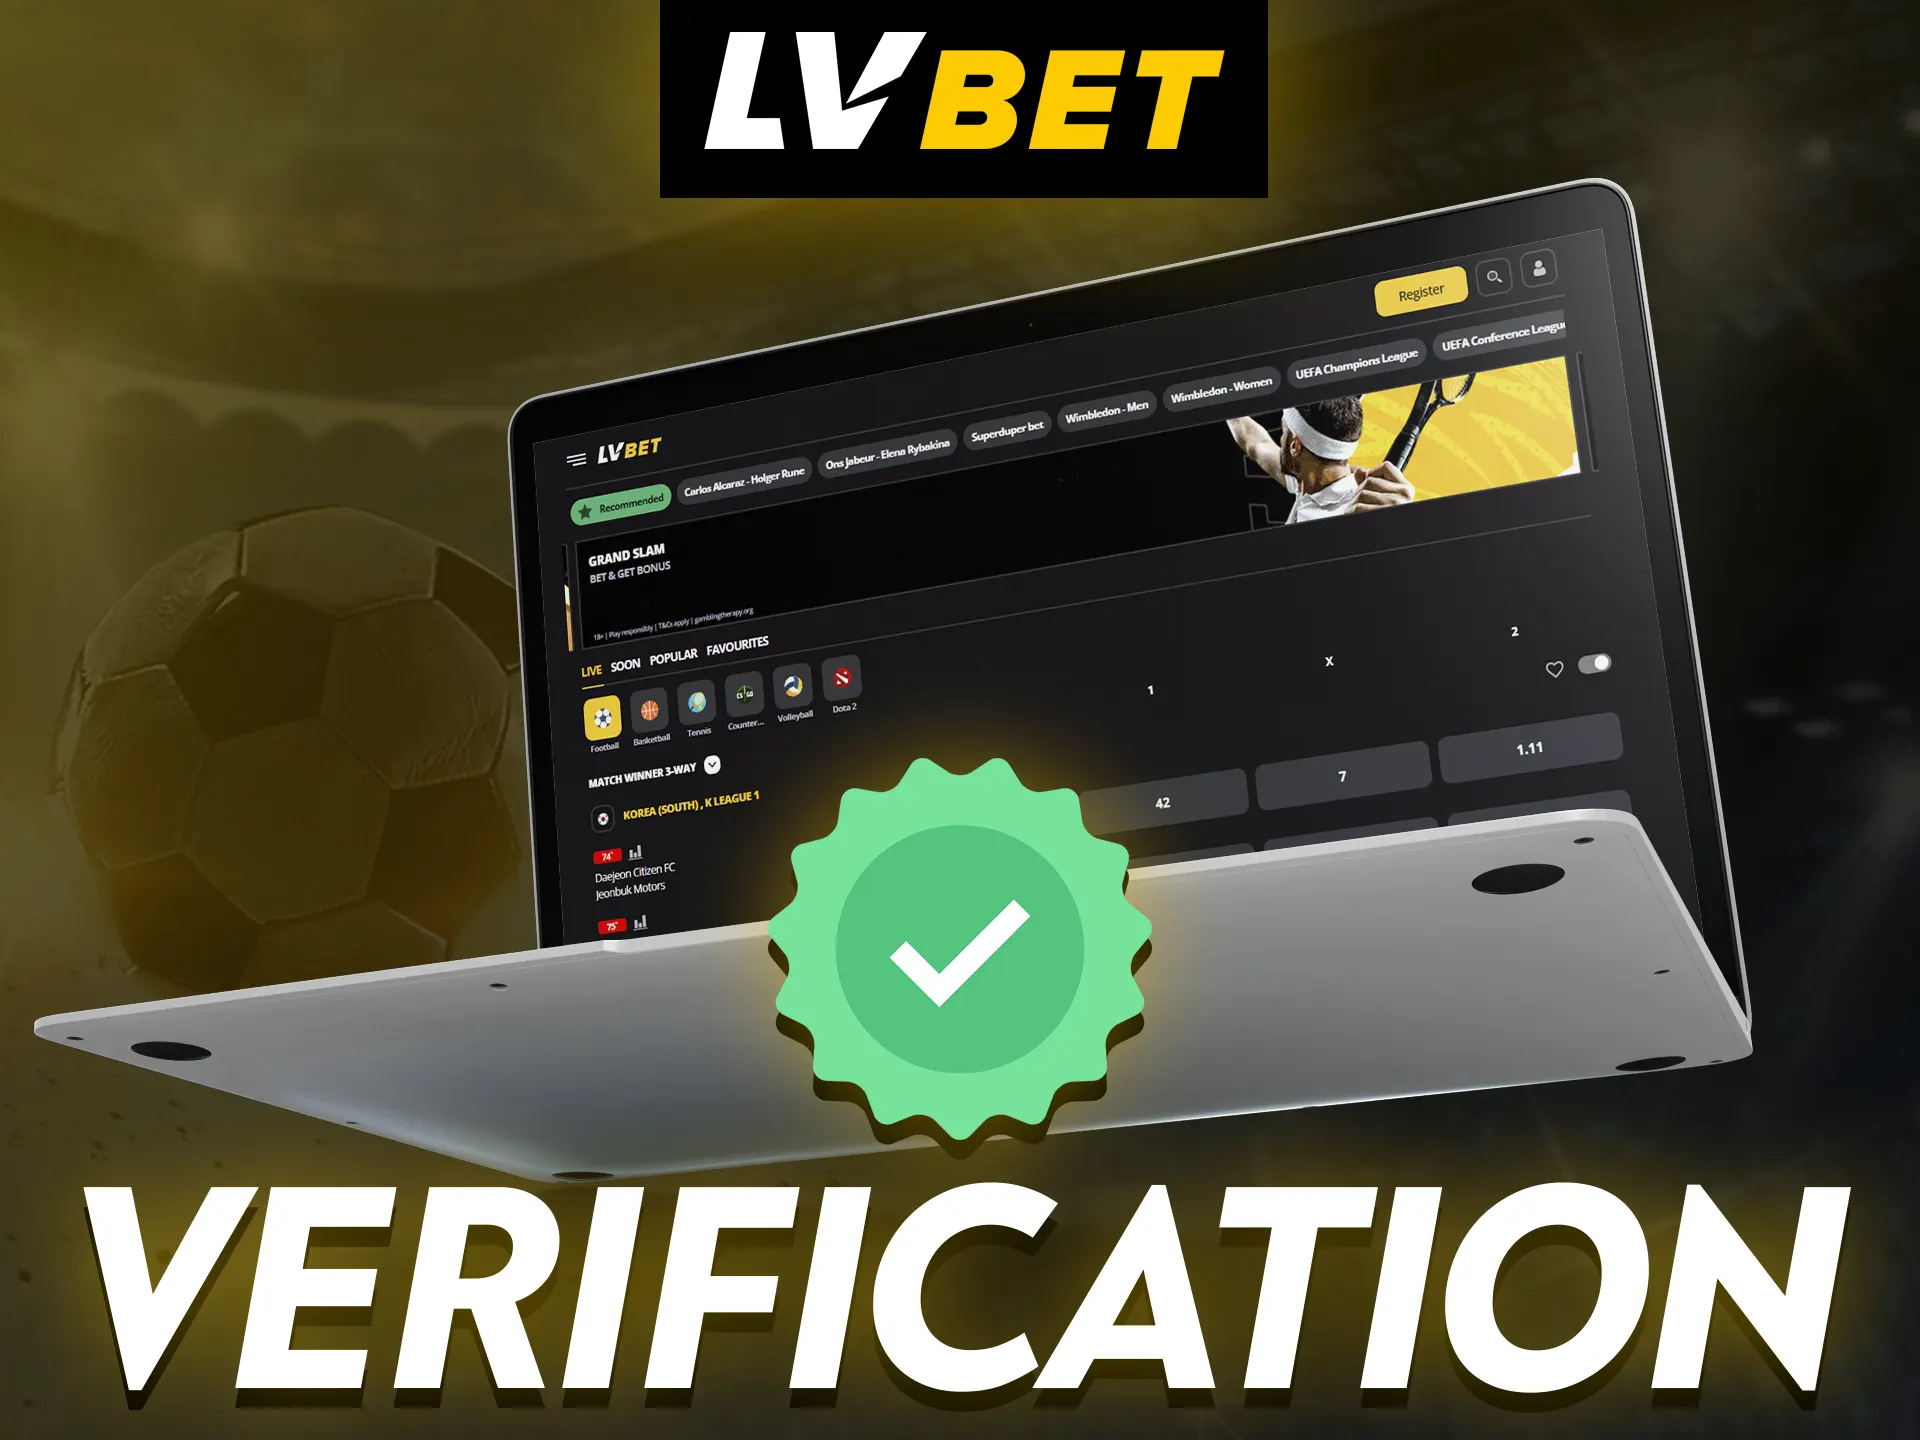 At LV Bet you need a simple verification to use all the features.